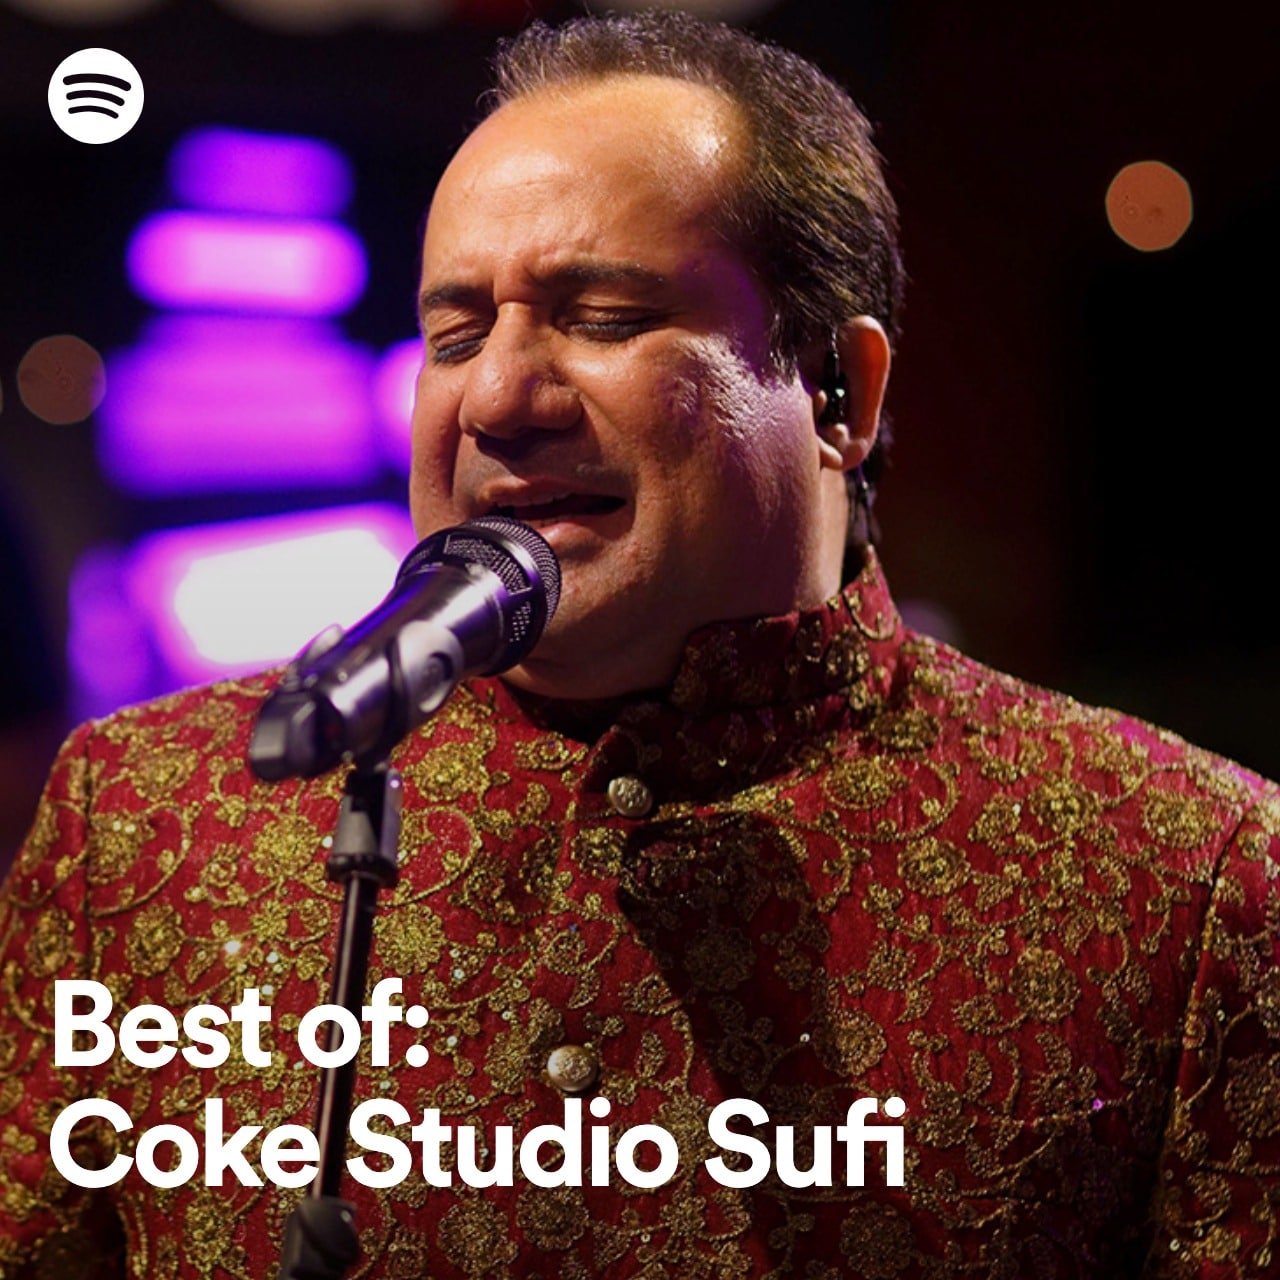 Spotify and Coke Studio Pakistan partner to celebrate the nation’s voices through an official destination